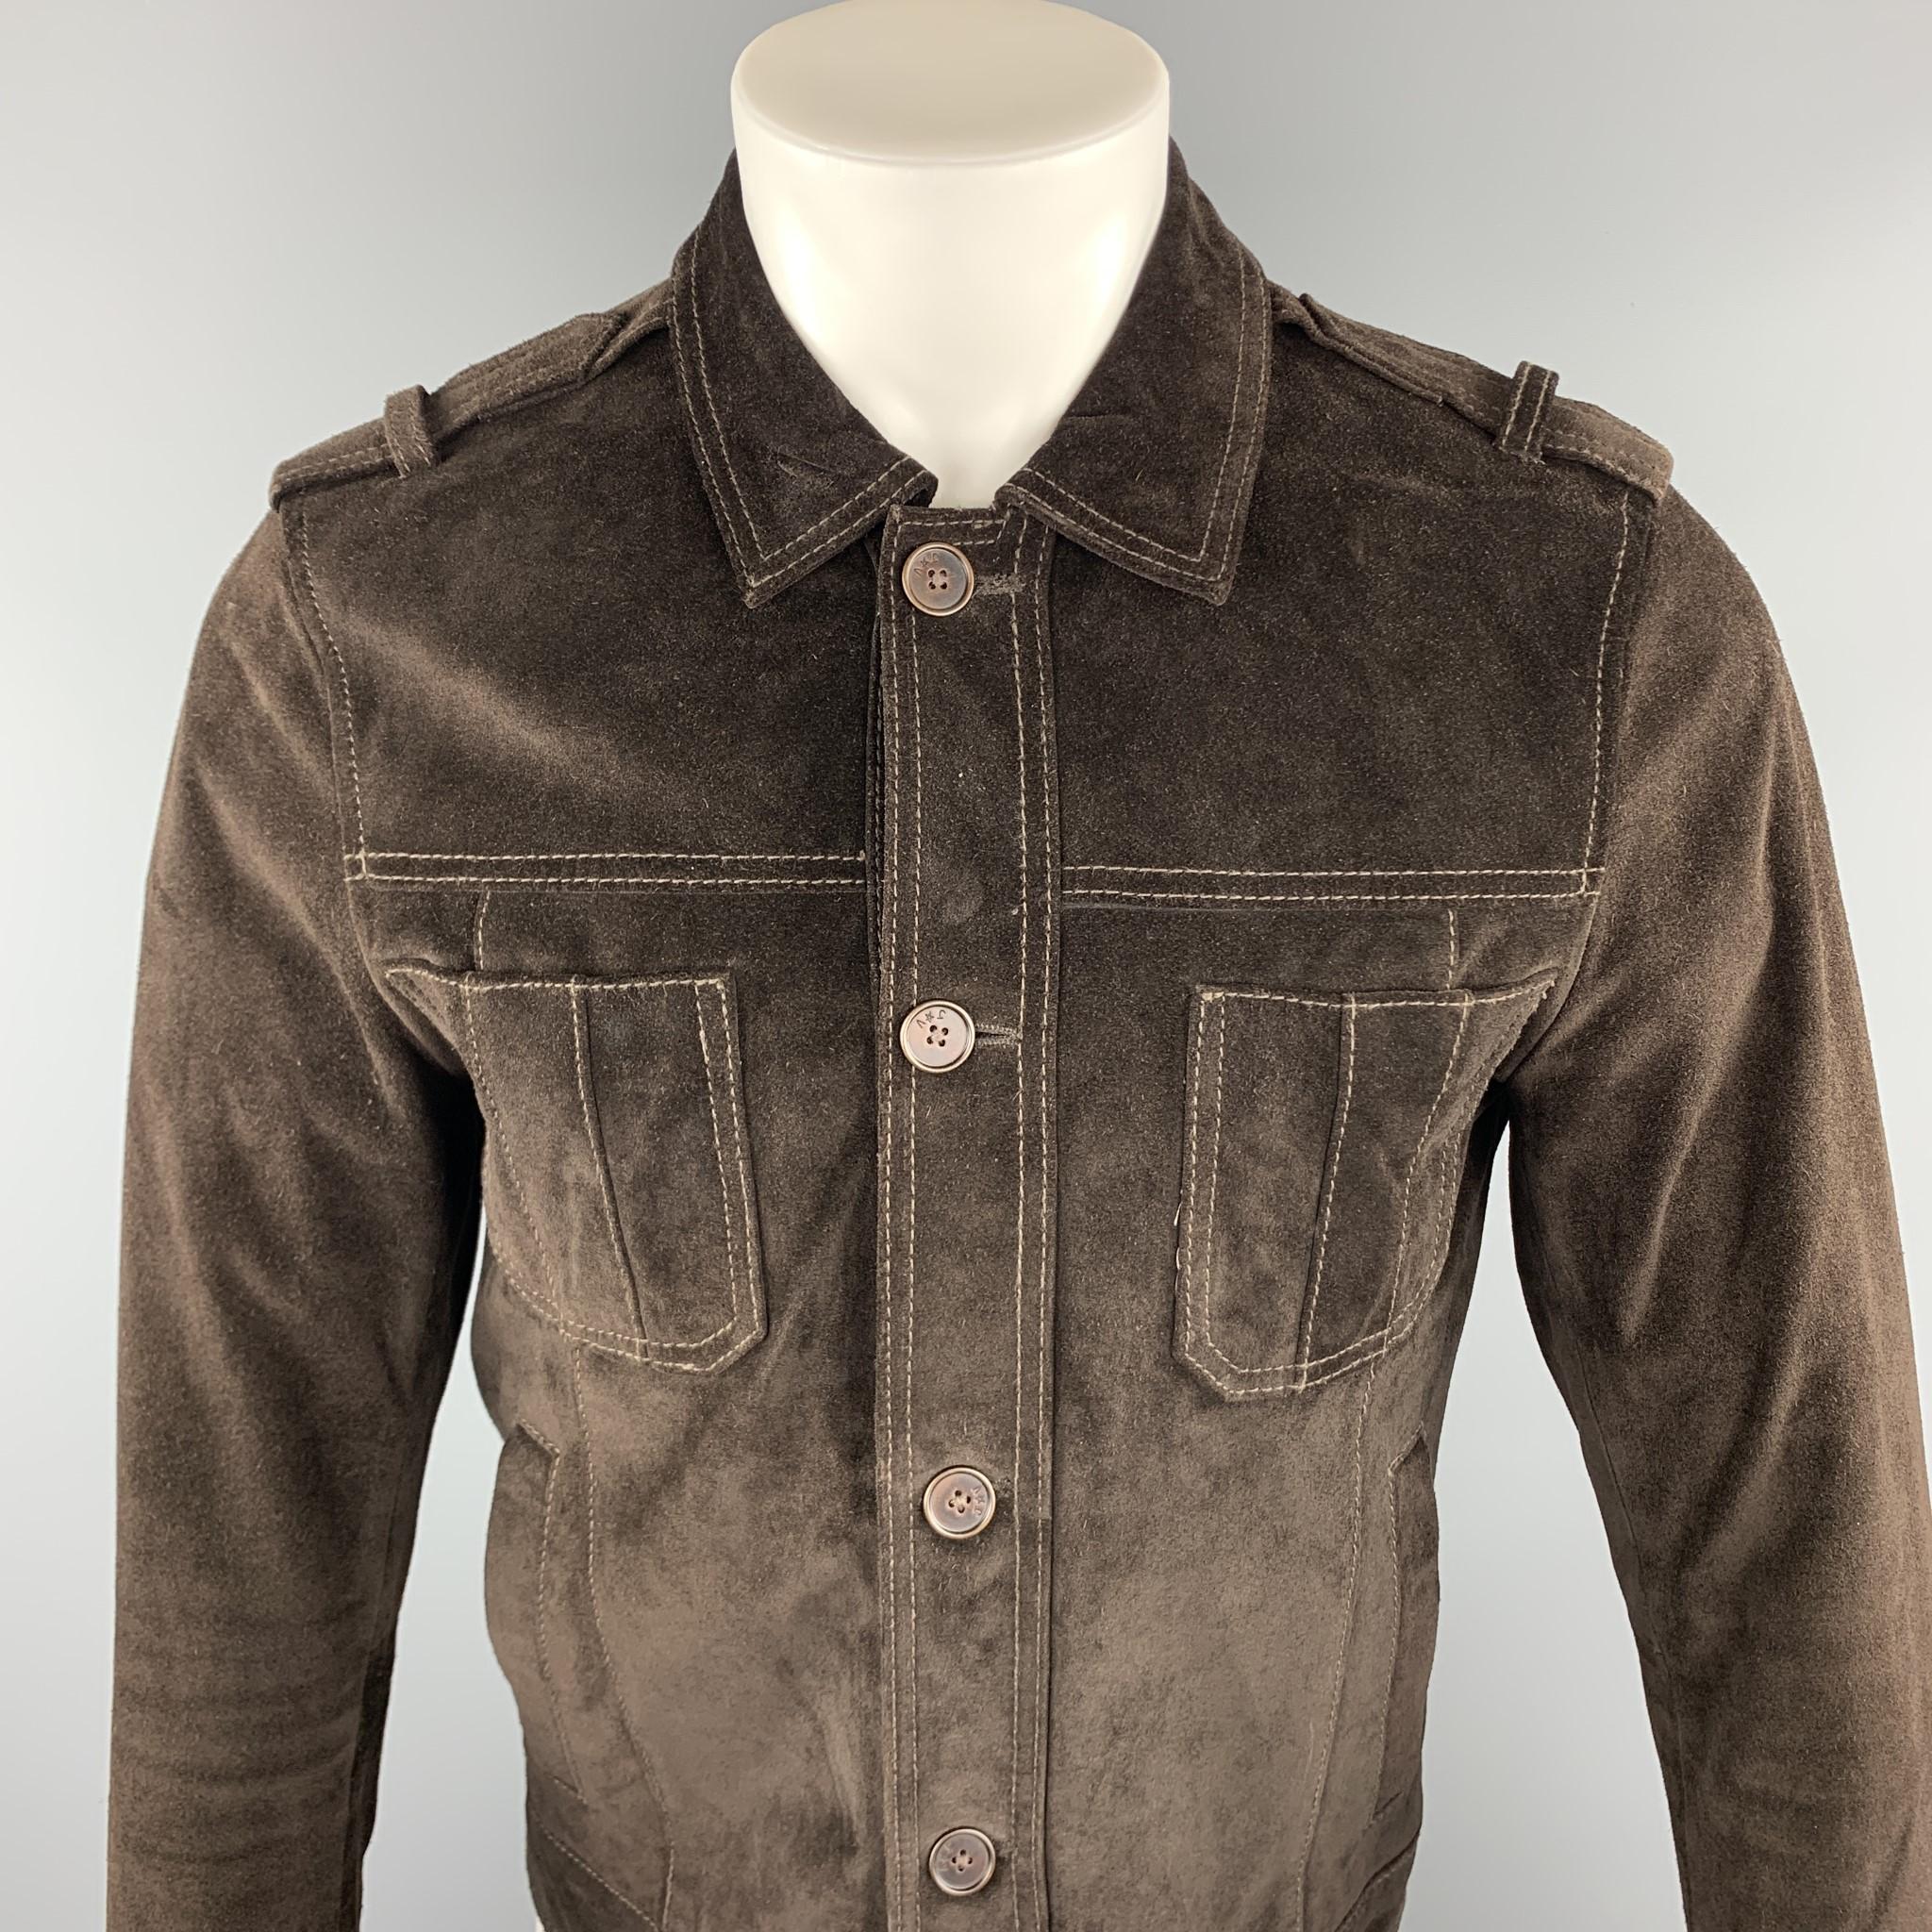 JOHN VARVATOS *U.S.A jacket comes in a brown suede leather featuring patch and slit pockets, contrast stitching, epaulettes, and a buttoned closure.

Very Good Pre-Owned Condition.
Marked: US S

Measurements:

Shoulder: 15.5 in. 
Chest: 36 in.